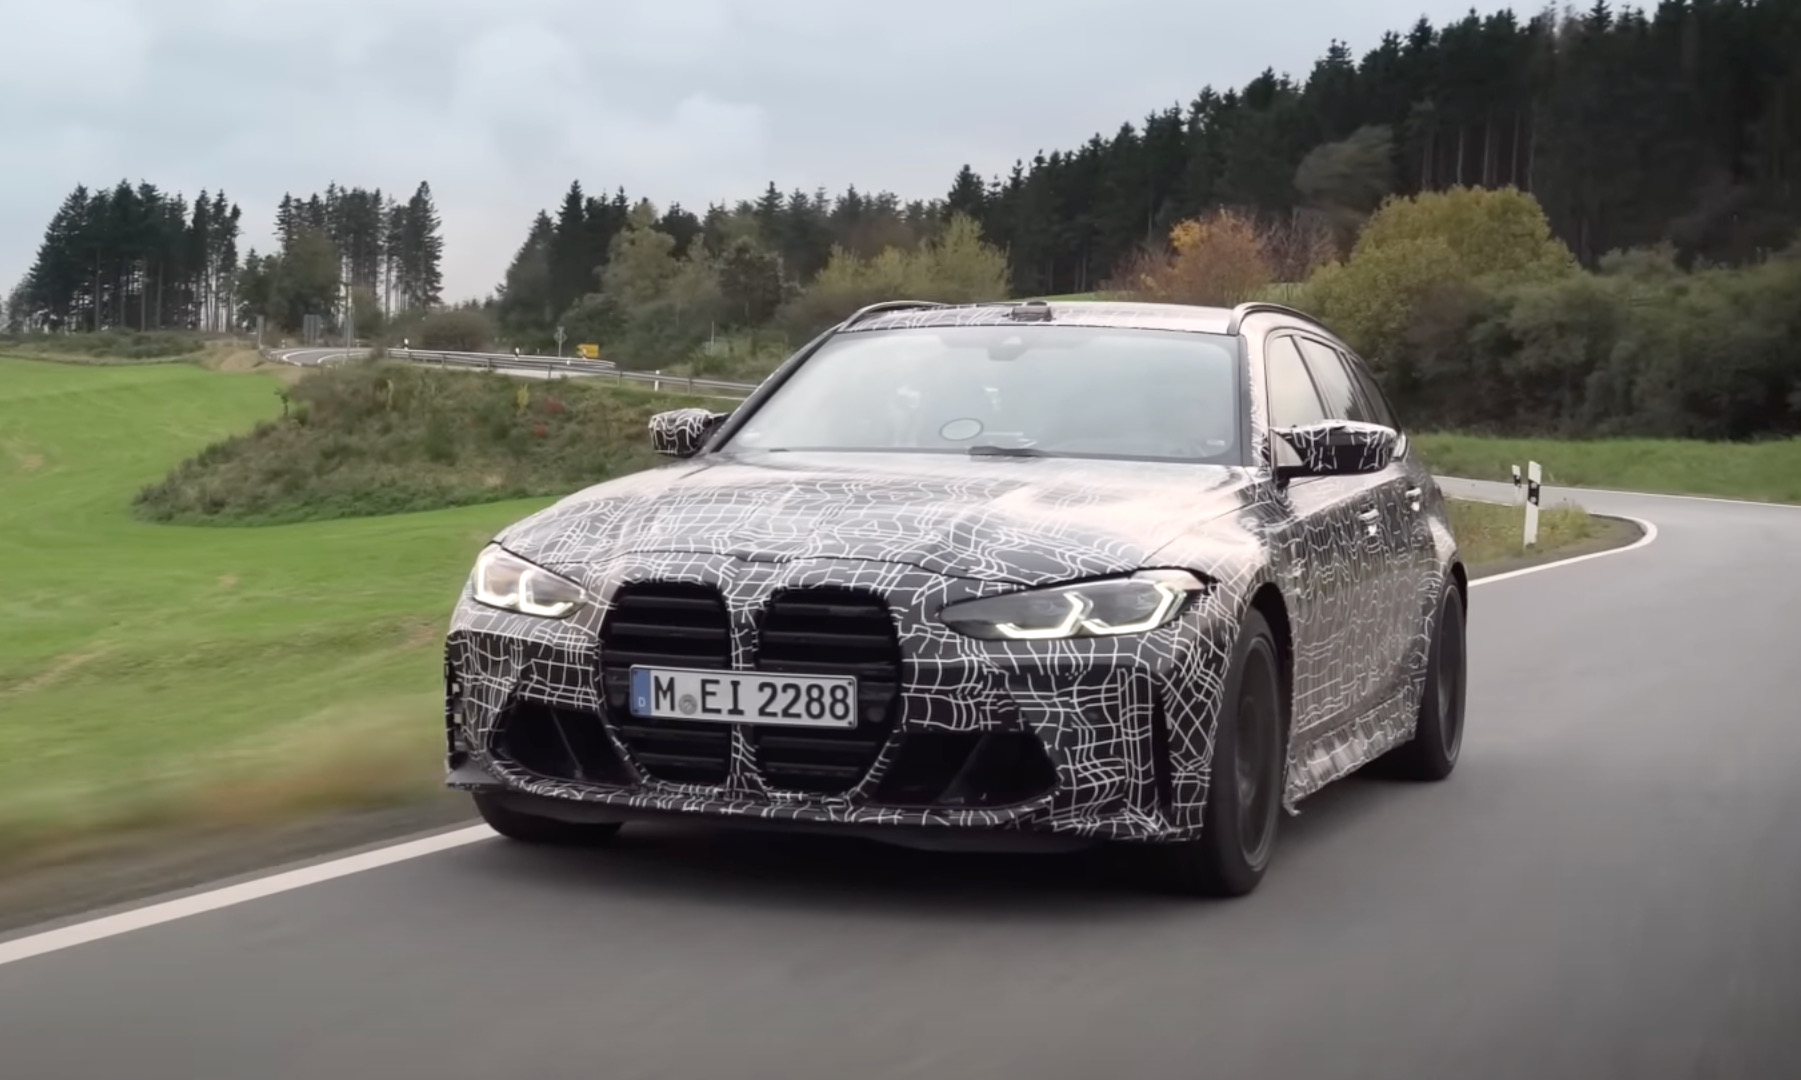 G21 BMW 3 Series Touring debuts - better practicality 